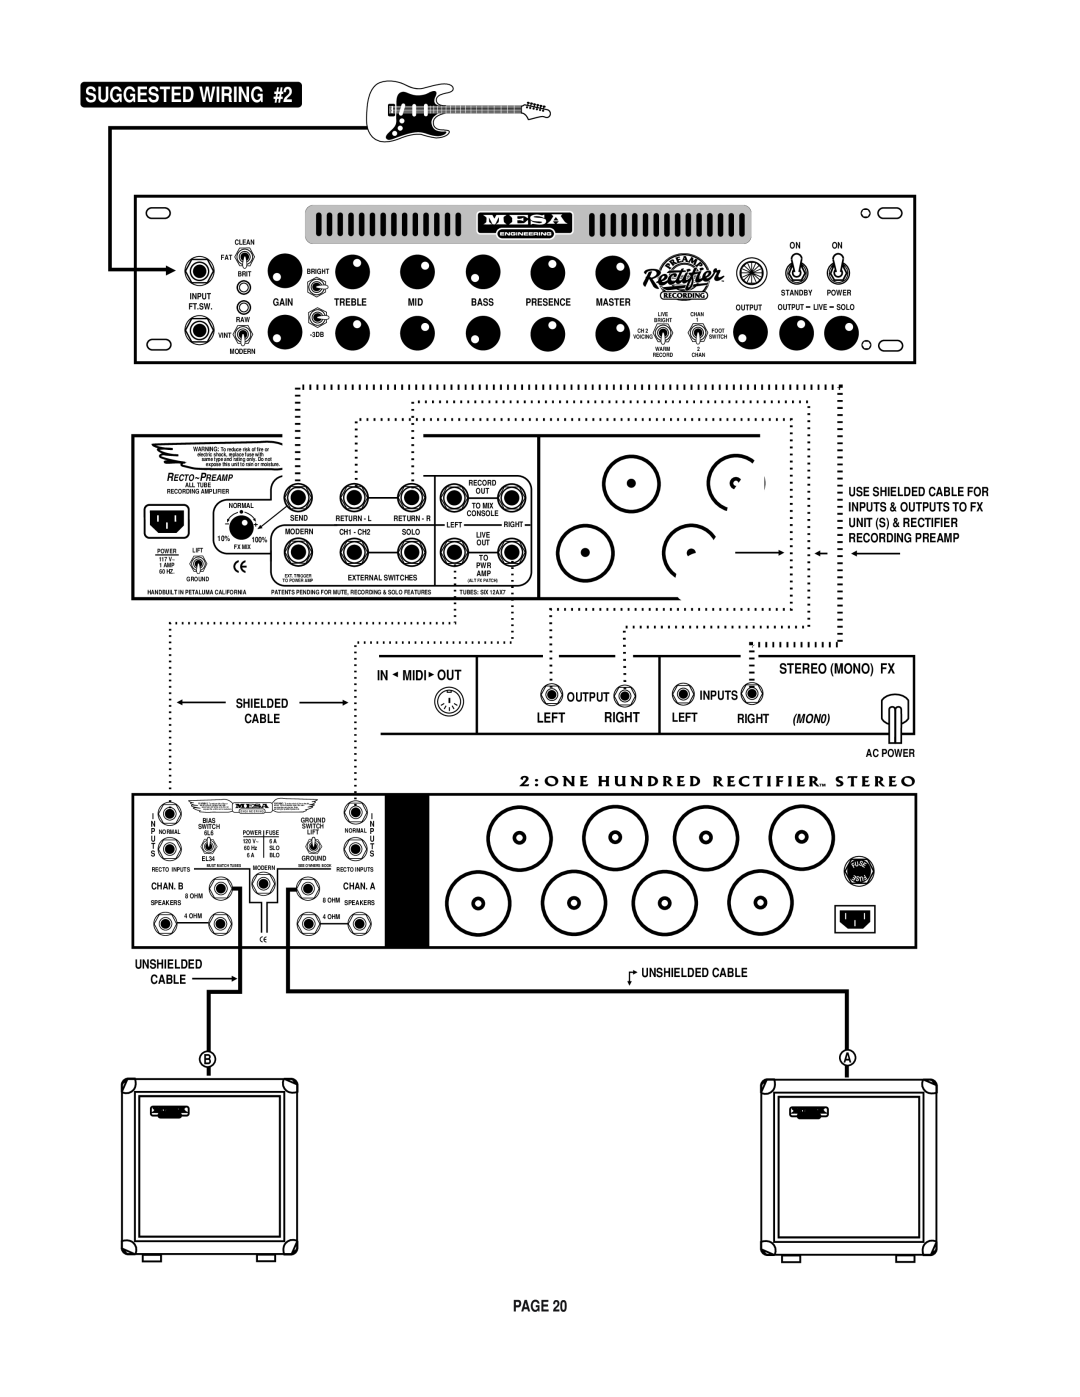 Mesa/Boogie Rectifier Stereo owner manual SUGGESTED WIRING #2, Output, Inputs, Right, MON0, Left 